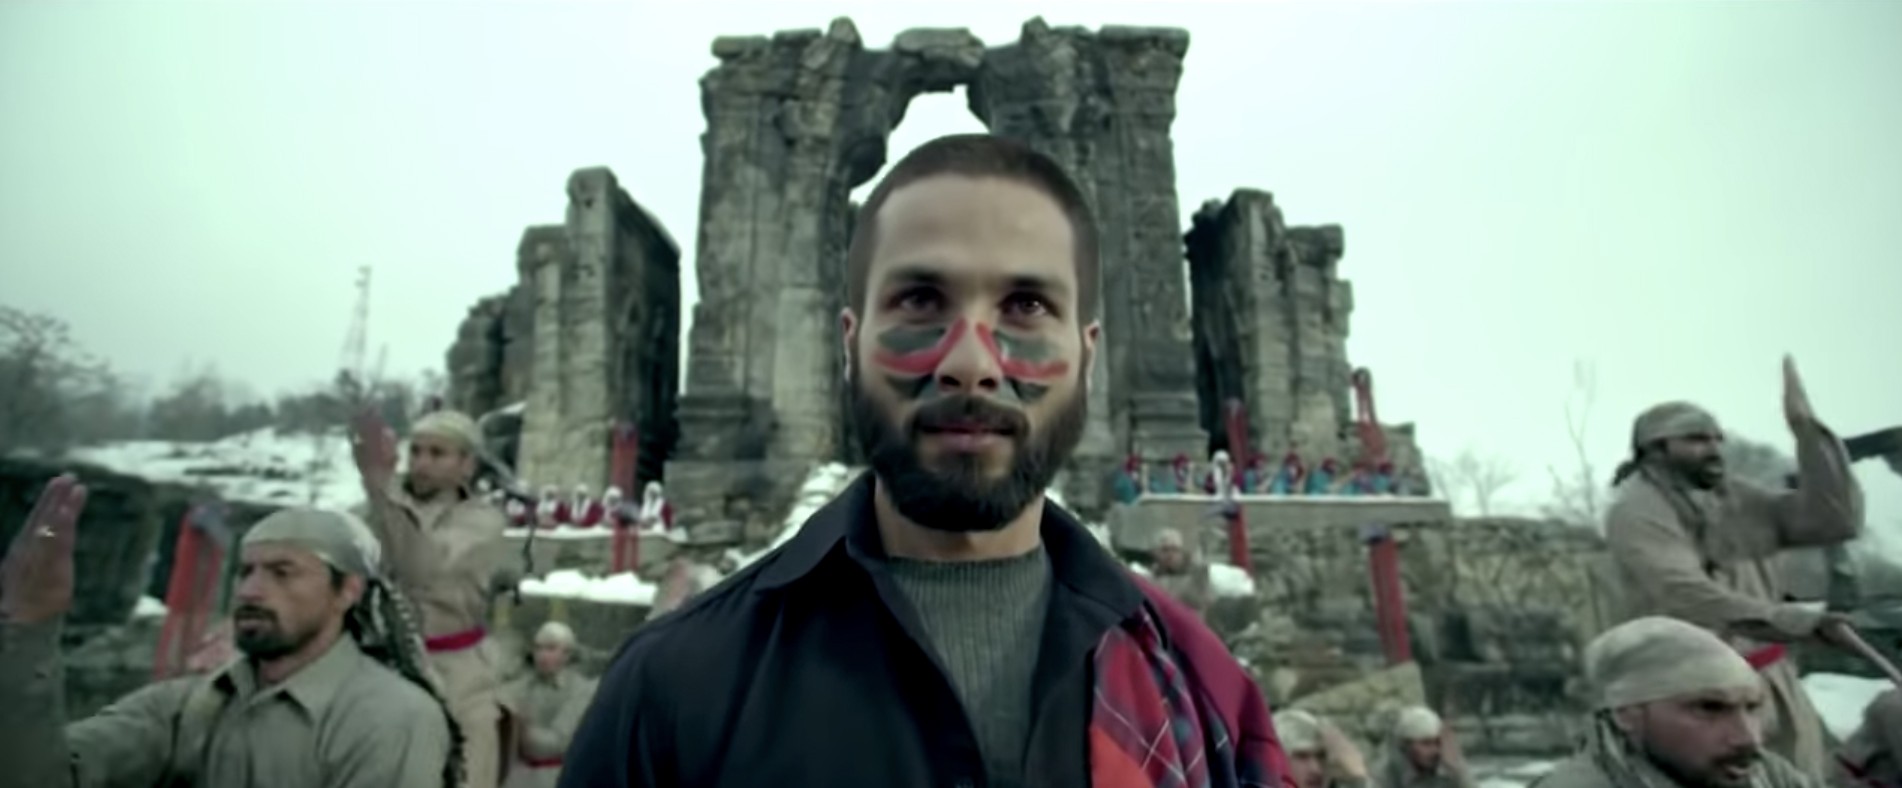 ‘Haider’ (2014) is a reworking of Shakespeare’s Hamlet, set in the ‘rotten state’ of Kashmir. Image: YouTube